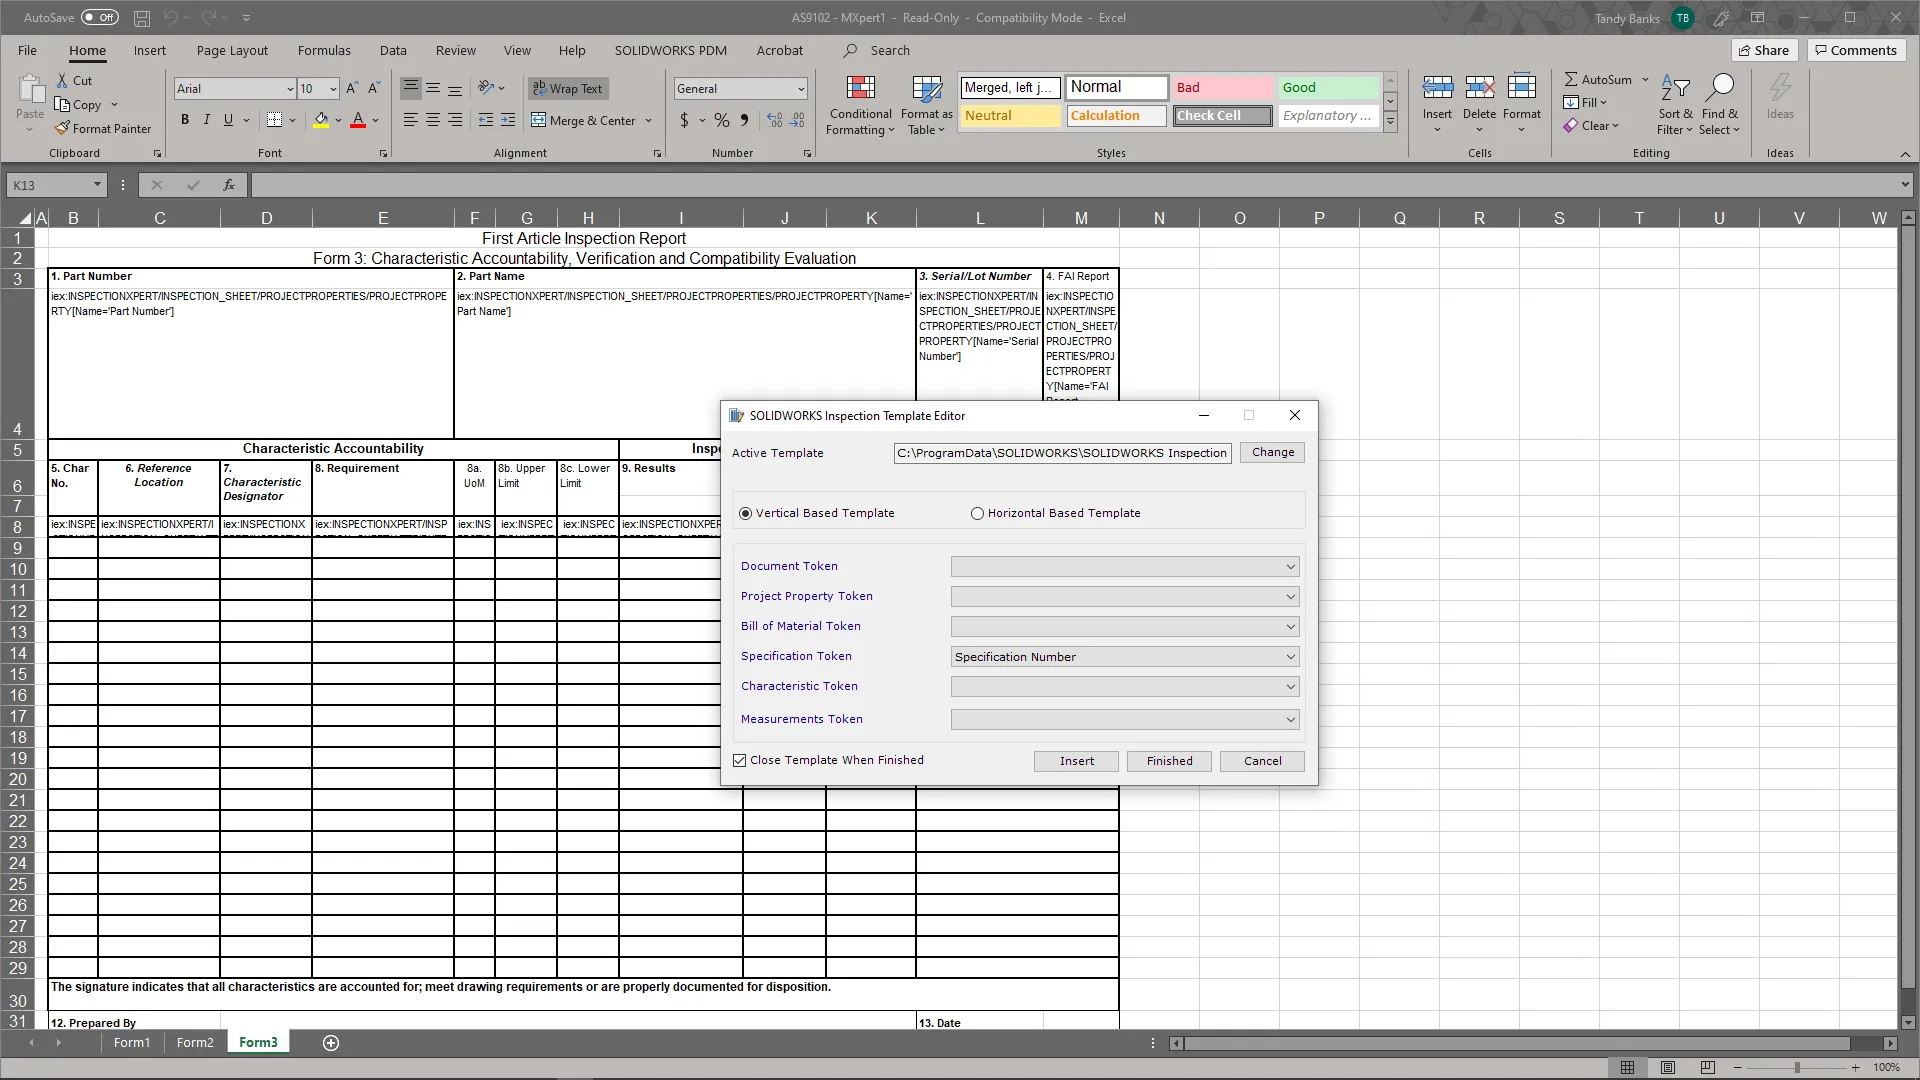 Learn How to Build Report Templates with SOLIDWORKS Inspection